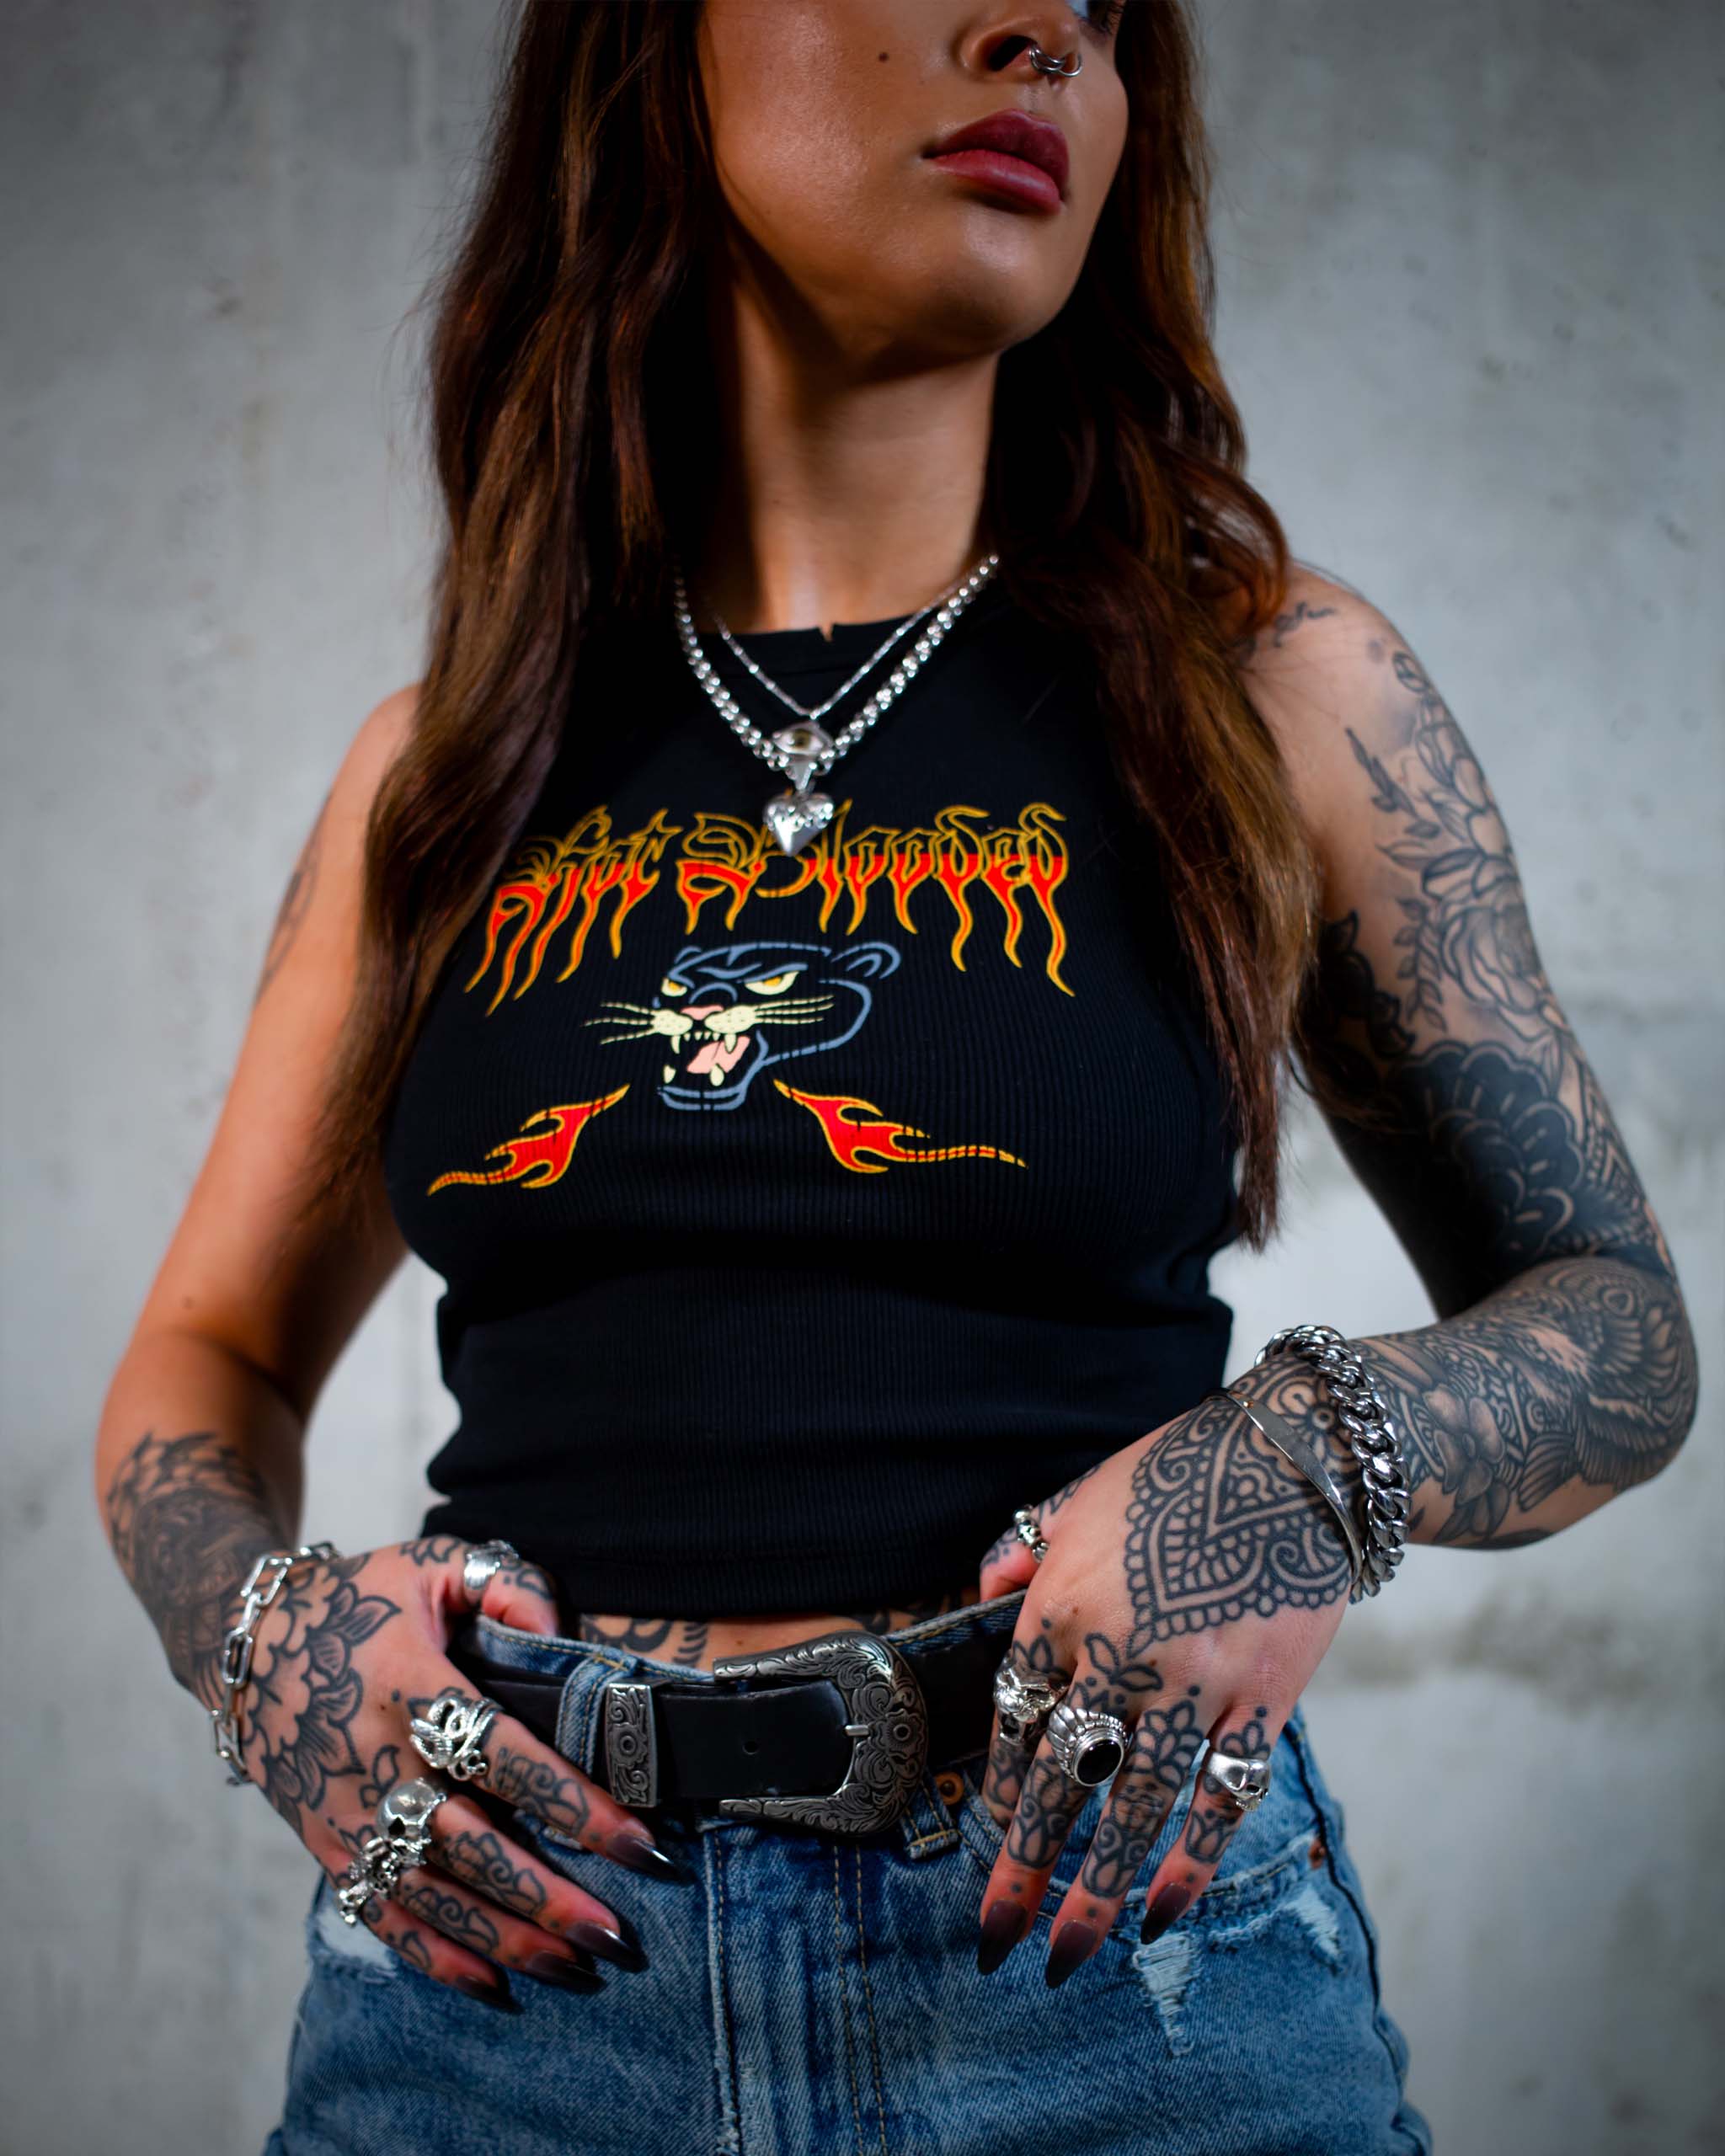 The Hot Blooded tank top by Sleazy Rider, featuring a tattoo style panther head.